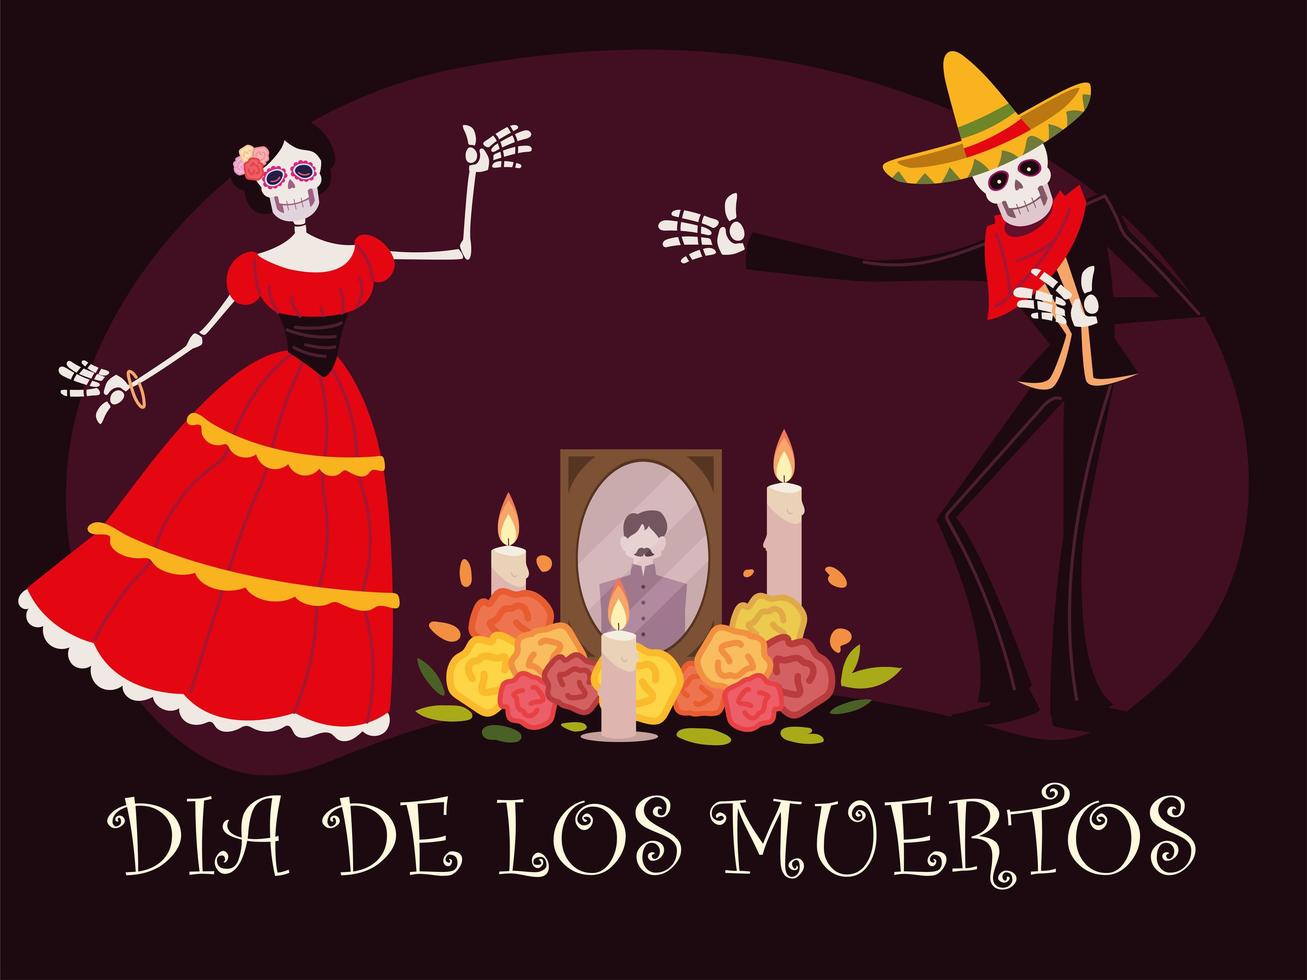 day of the dead, altar with catrina skeleton photo candles and flowers, mexican celebration vector